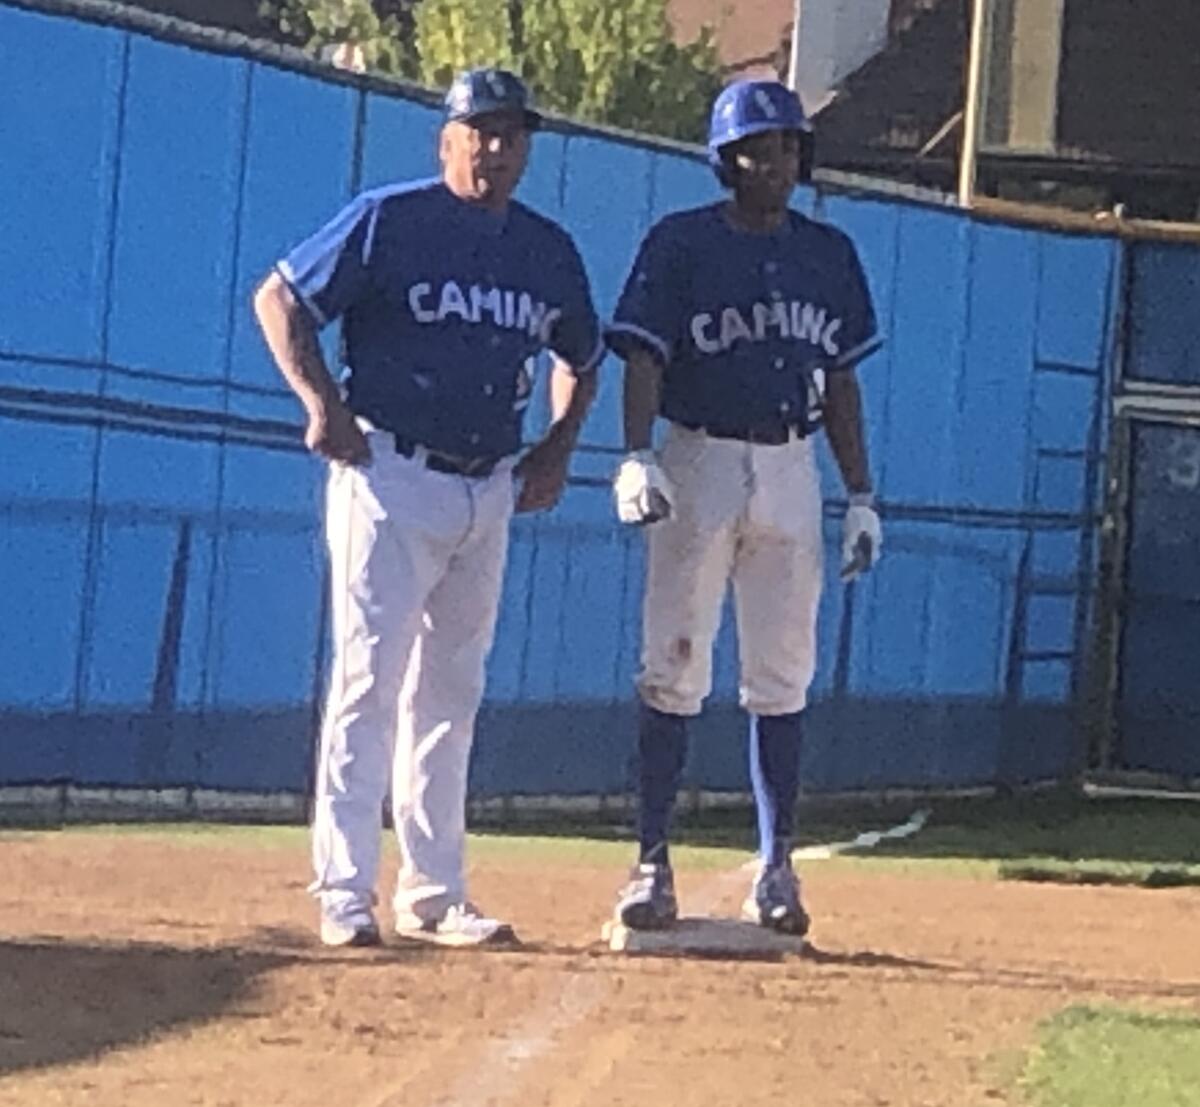 Dominic Carnes, right, had a two-run triple for El Camino Real on Tuesday in a victory over Newbury Park to help the Conquistadores improve to 2-0 in the Easton tournament.